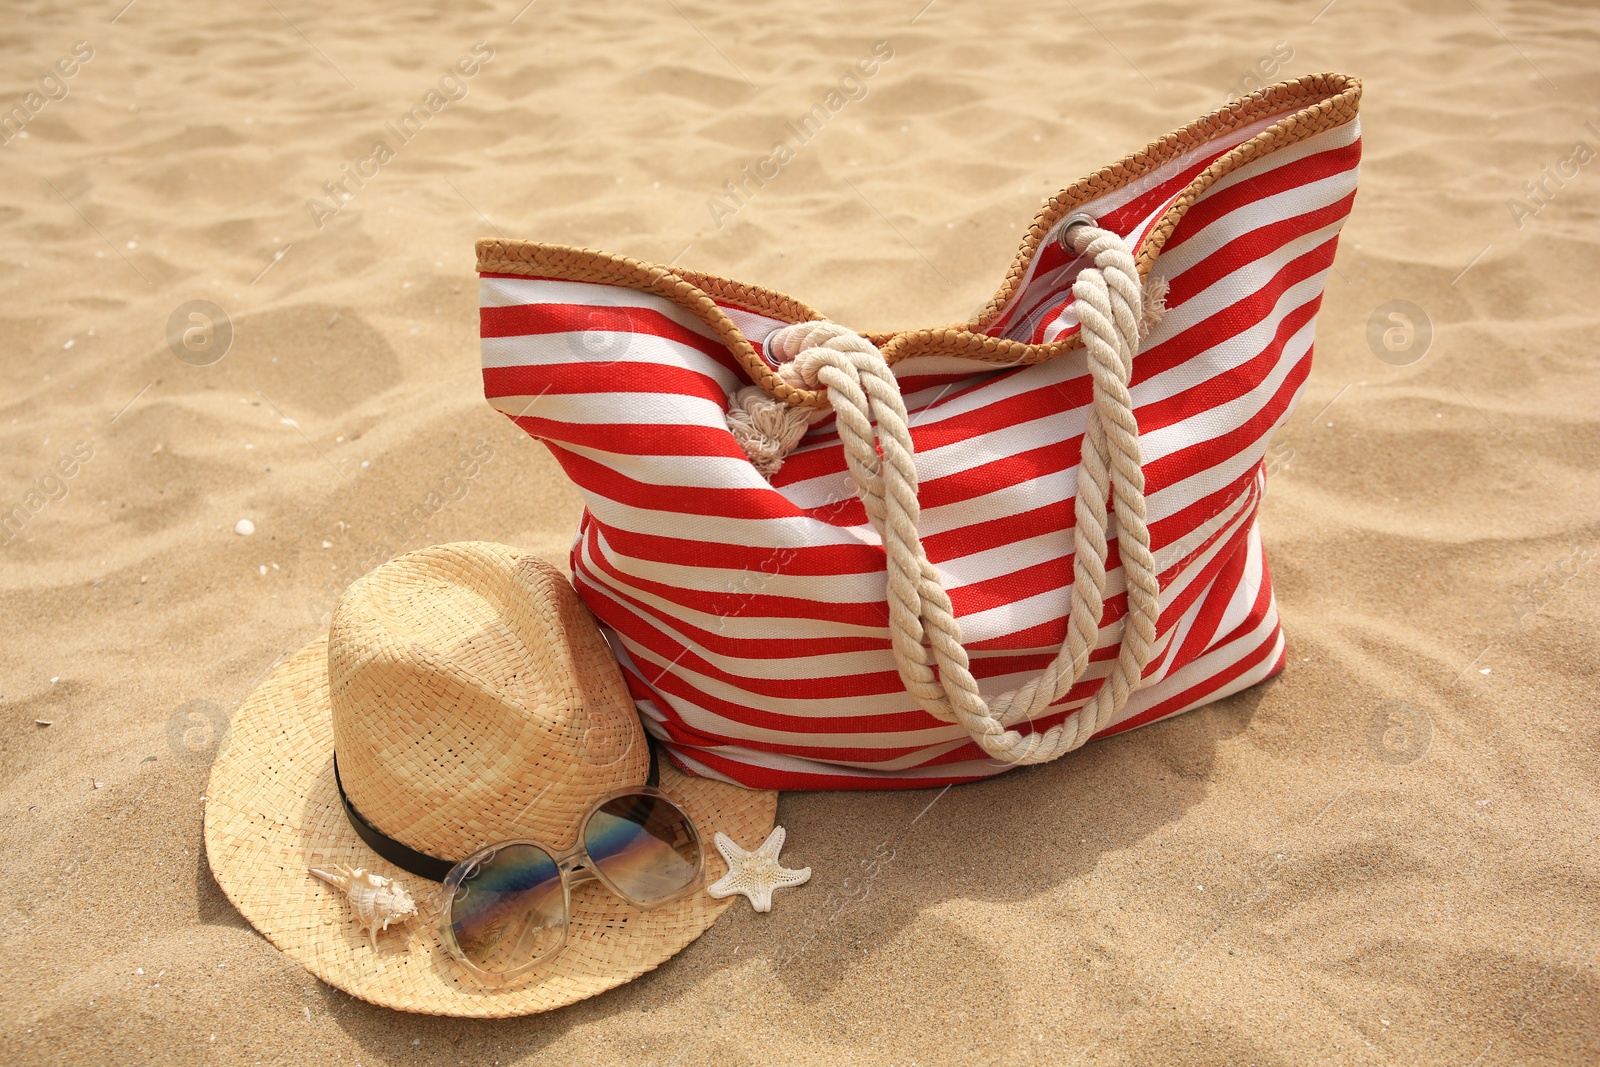 Photo of Stylish striped bag with straw hat, sunglasses, seashell and starfish on sand. Beach accessories